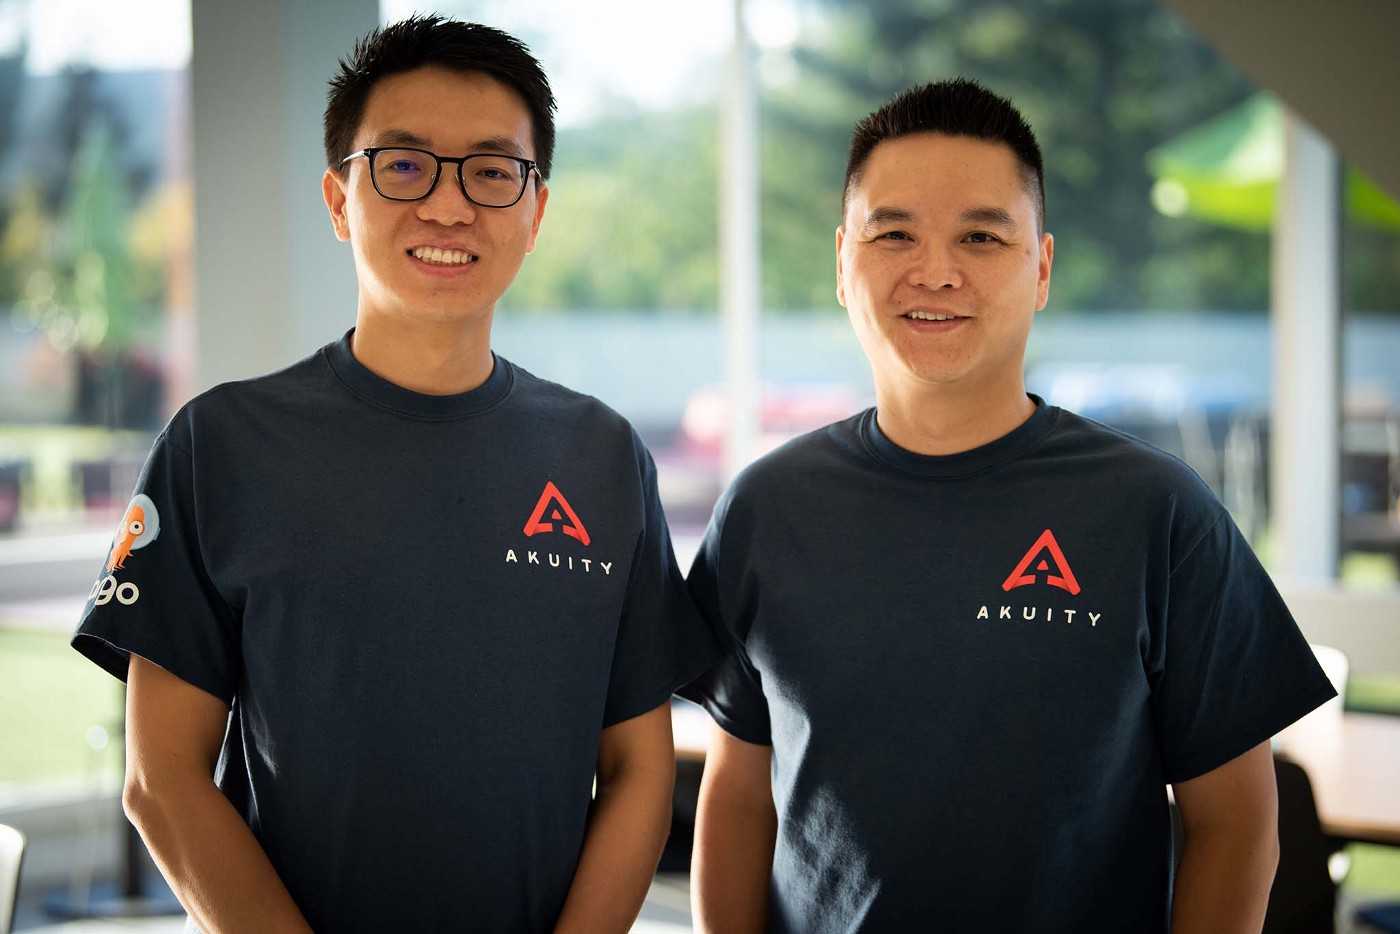 Akuity founders Hong Wang (left) and Jesse Suen (right)